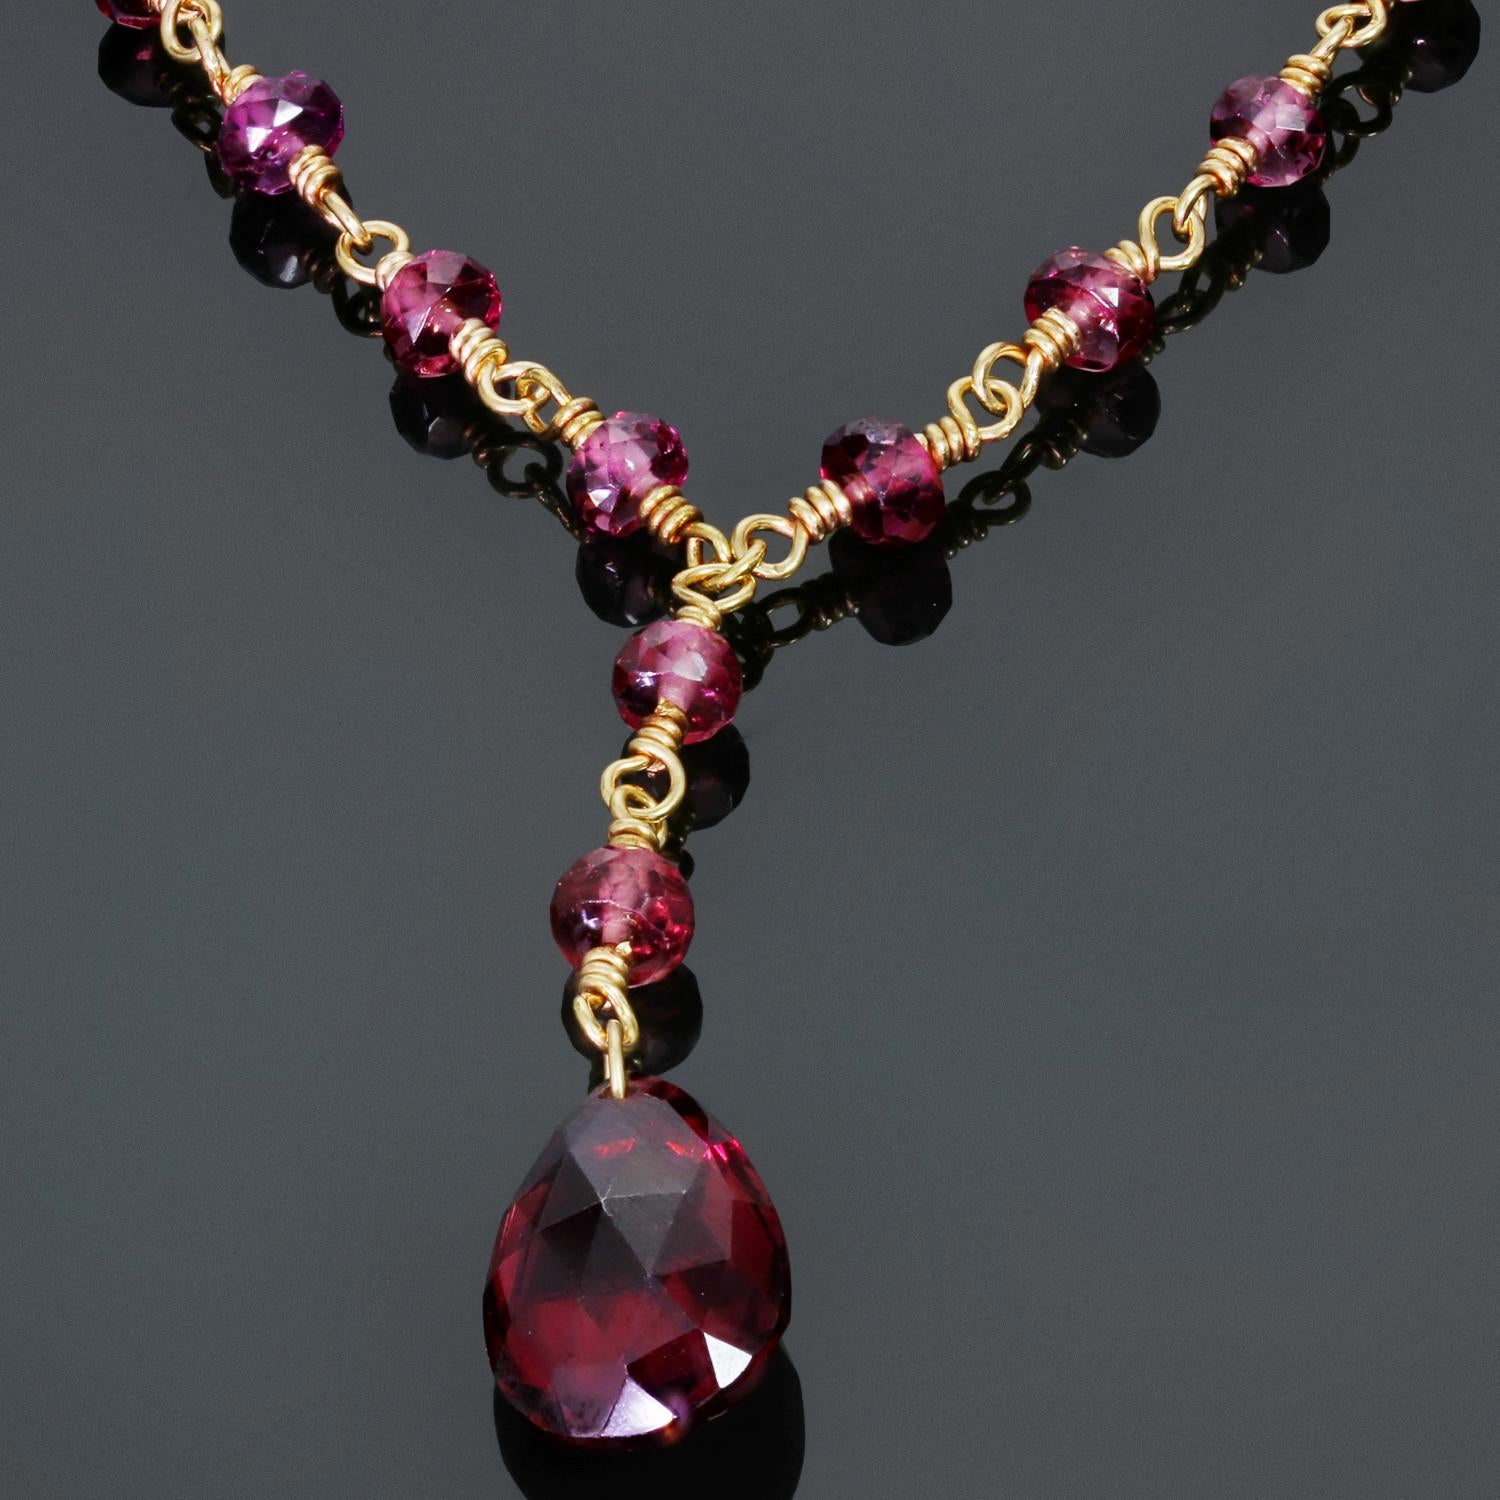 This gorgeous Tiffany & Co. pendant necklace features briolette beads crafted in rhodolite garnet and completed with an 18k white gold clasp. Made in United States circa 1990s. Measurements: 0.35